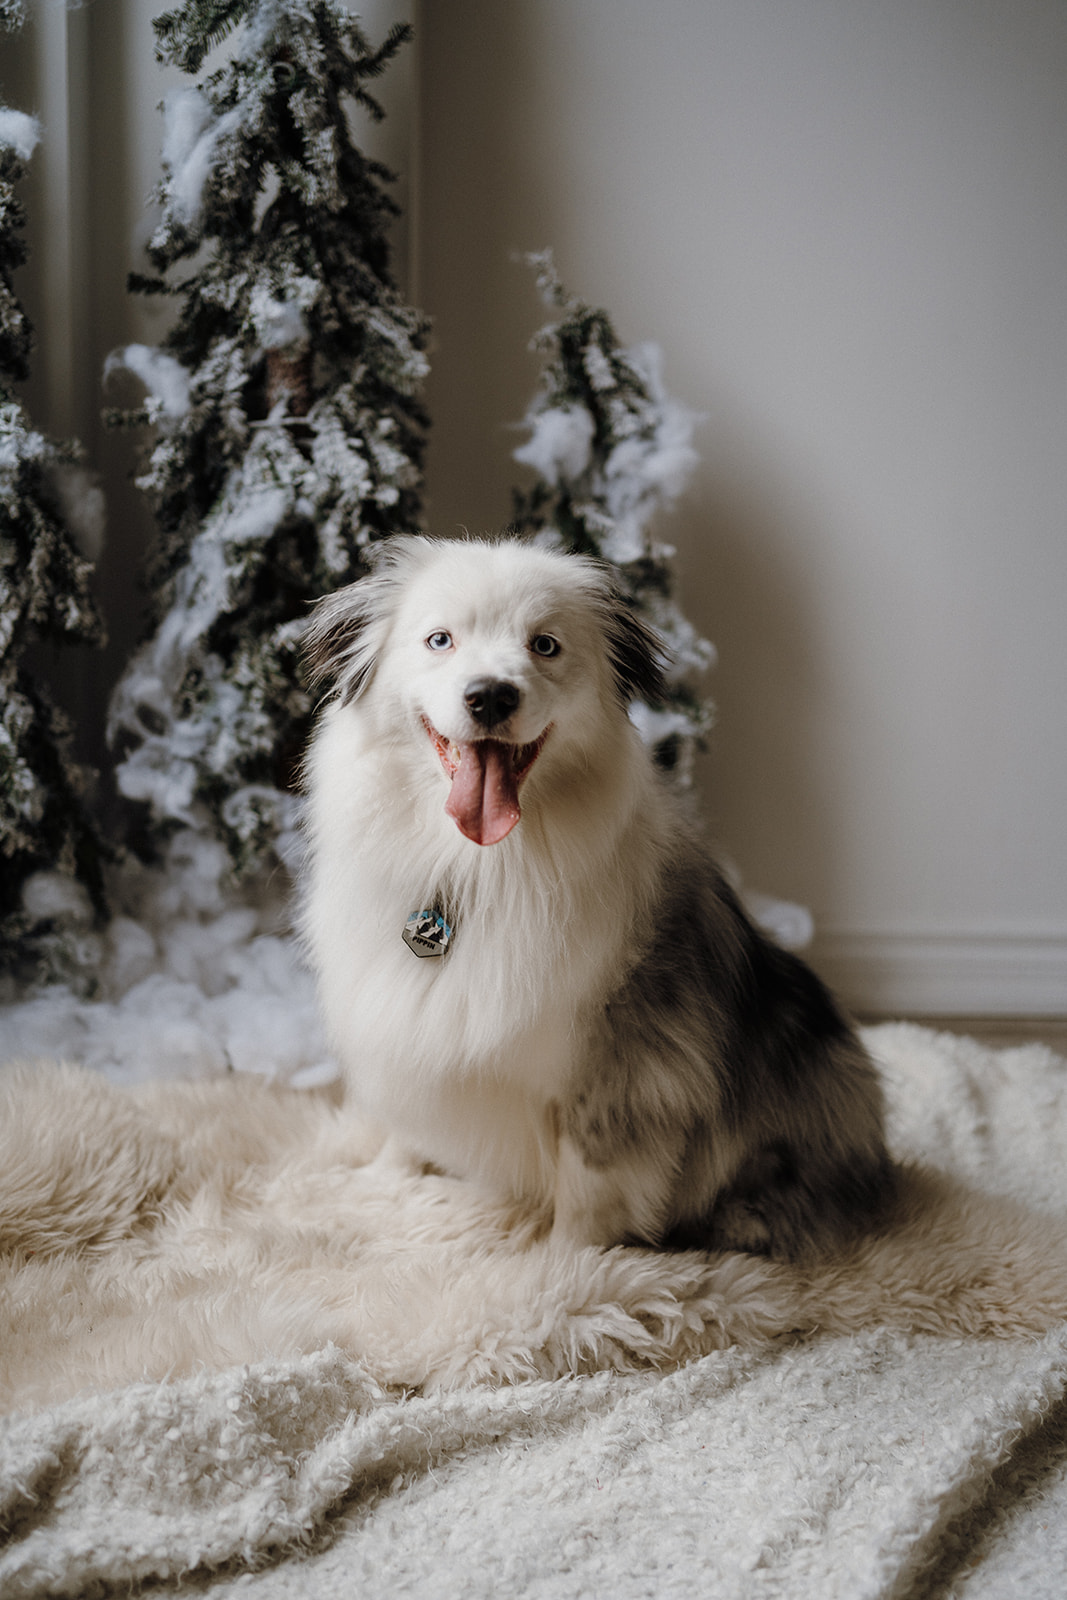 A dog sitting in front of a Christmas Tree.